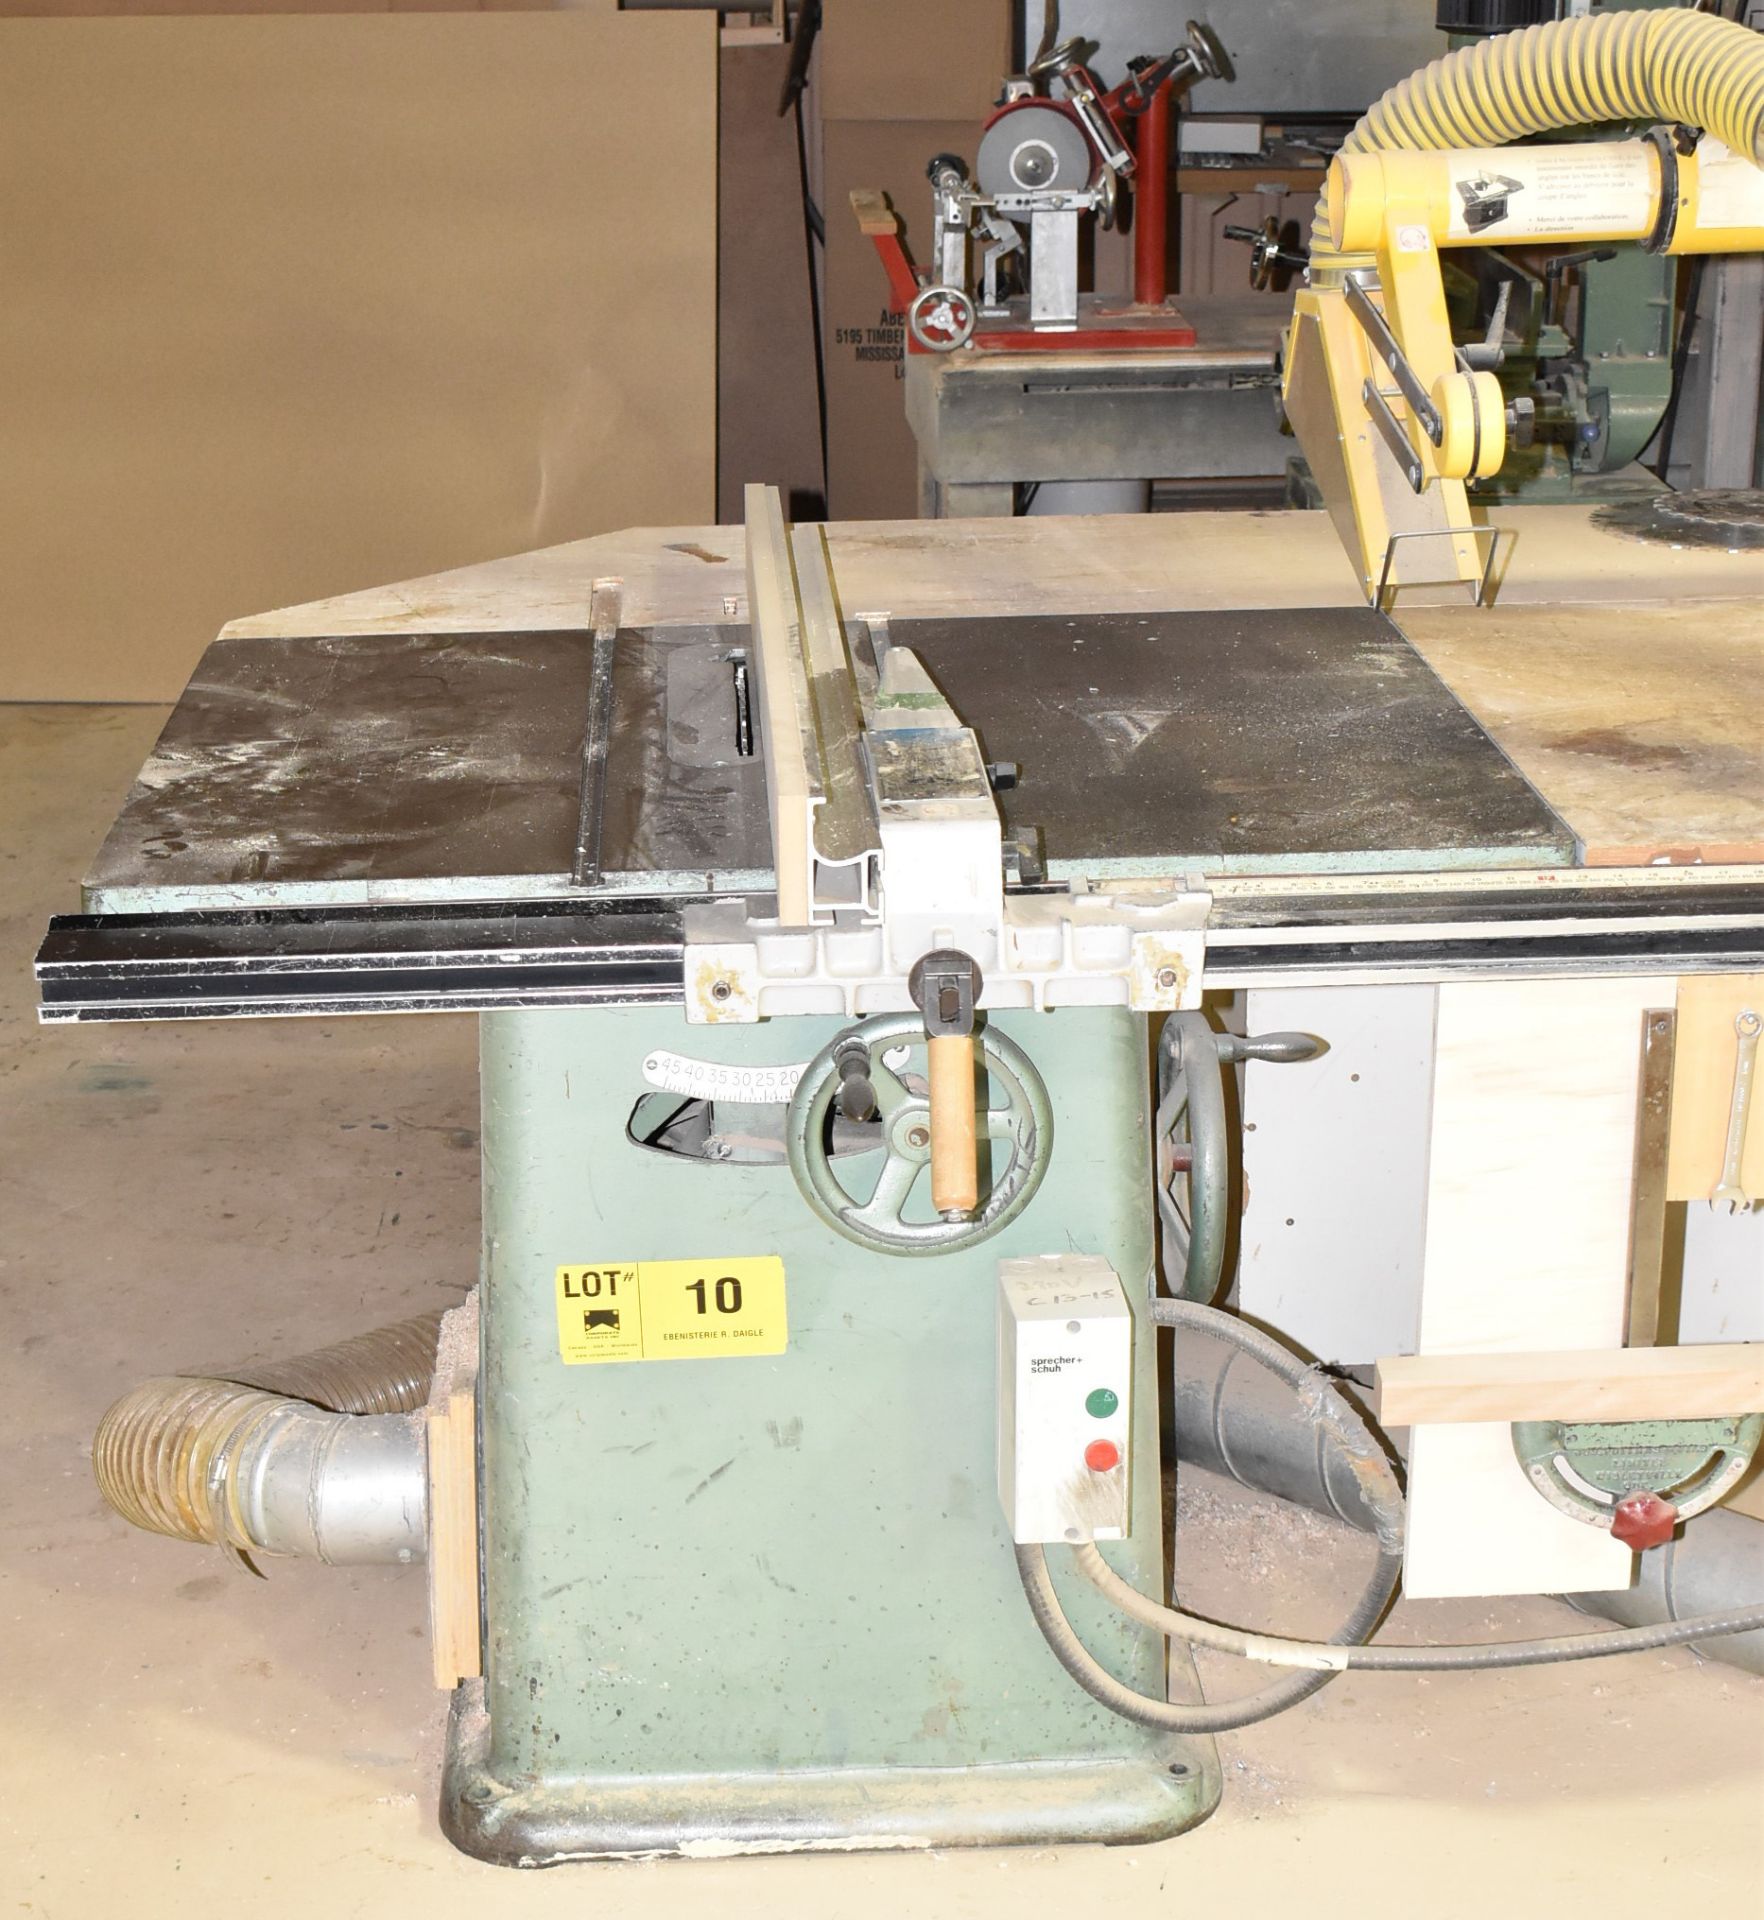 POITRAS 12000 3 HP TABLE SAW WITH EXCALIBUR OVERARM BLADE GUARD, 115-220V/1PH/60HZ, S/N N-73-12- - Image 2 of 8